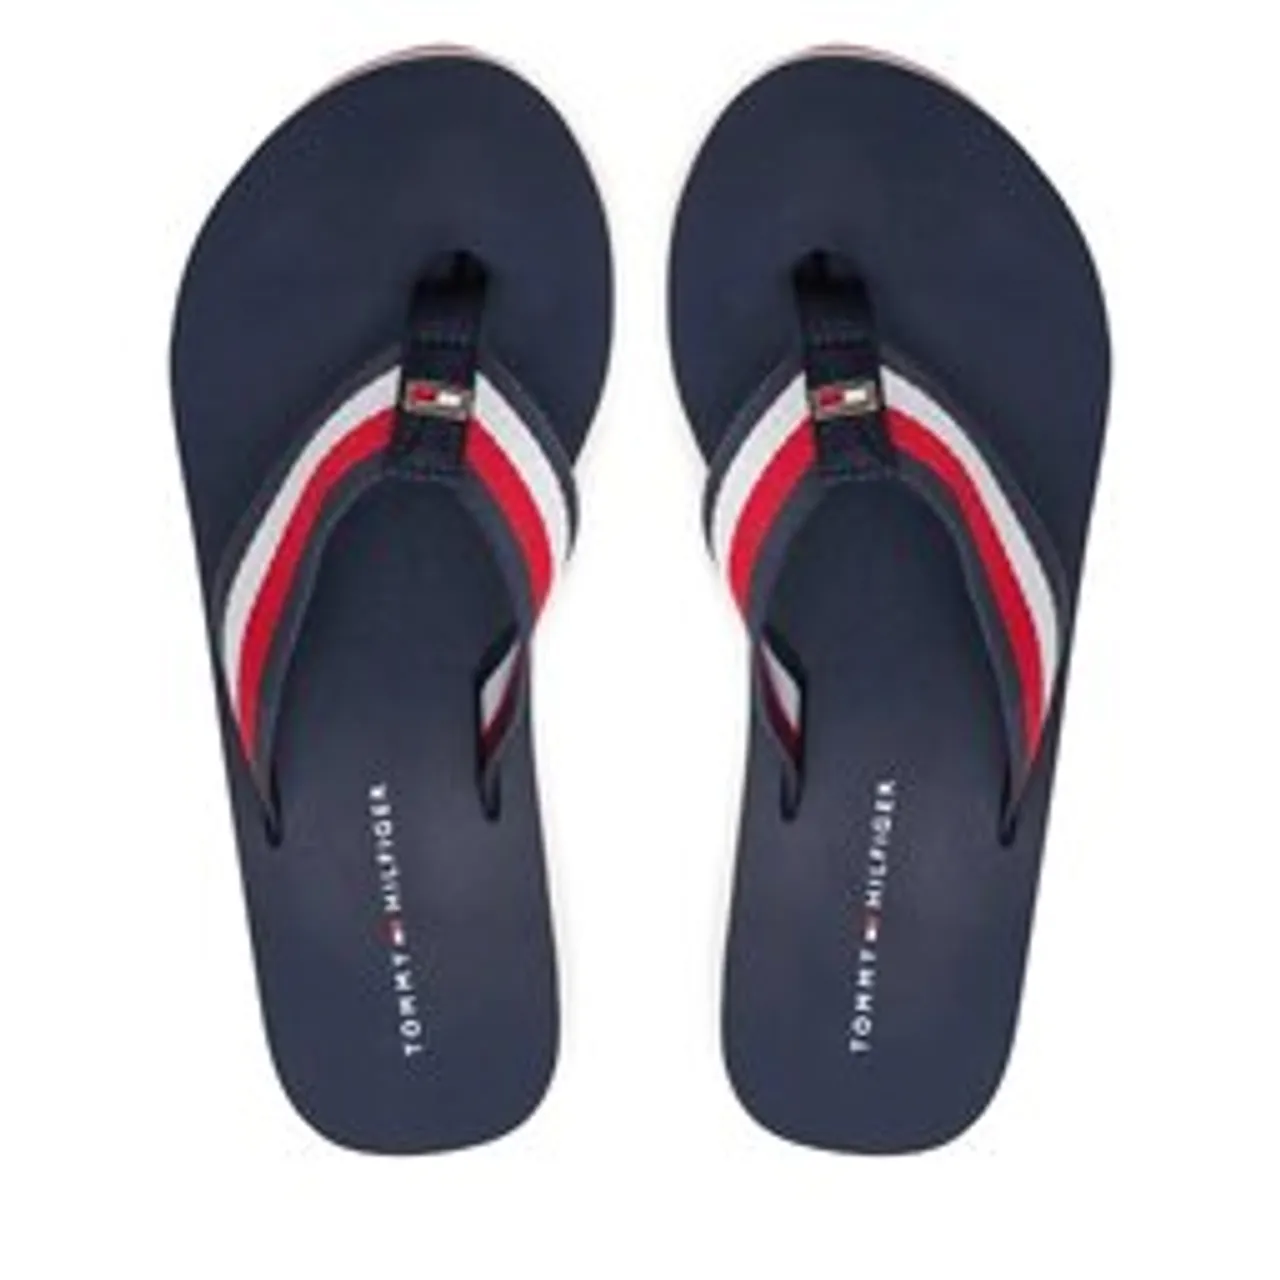 Zehentrenner Tommy Hilfiger Corporate Wedge Beach Sandal FW0FW07987 Red White Blue 0G0